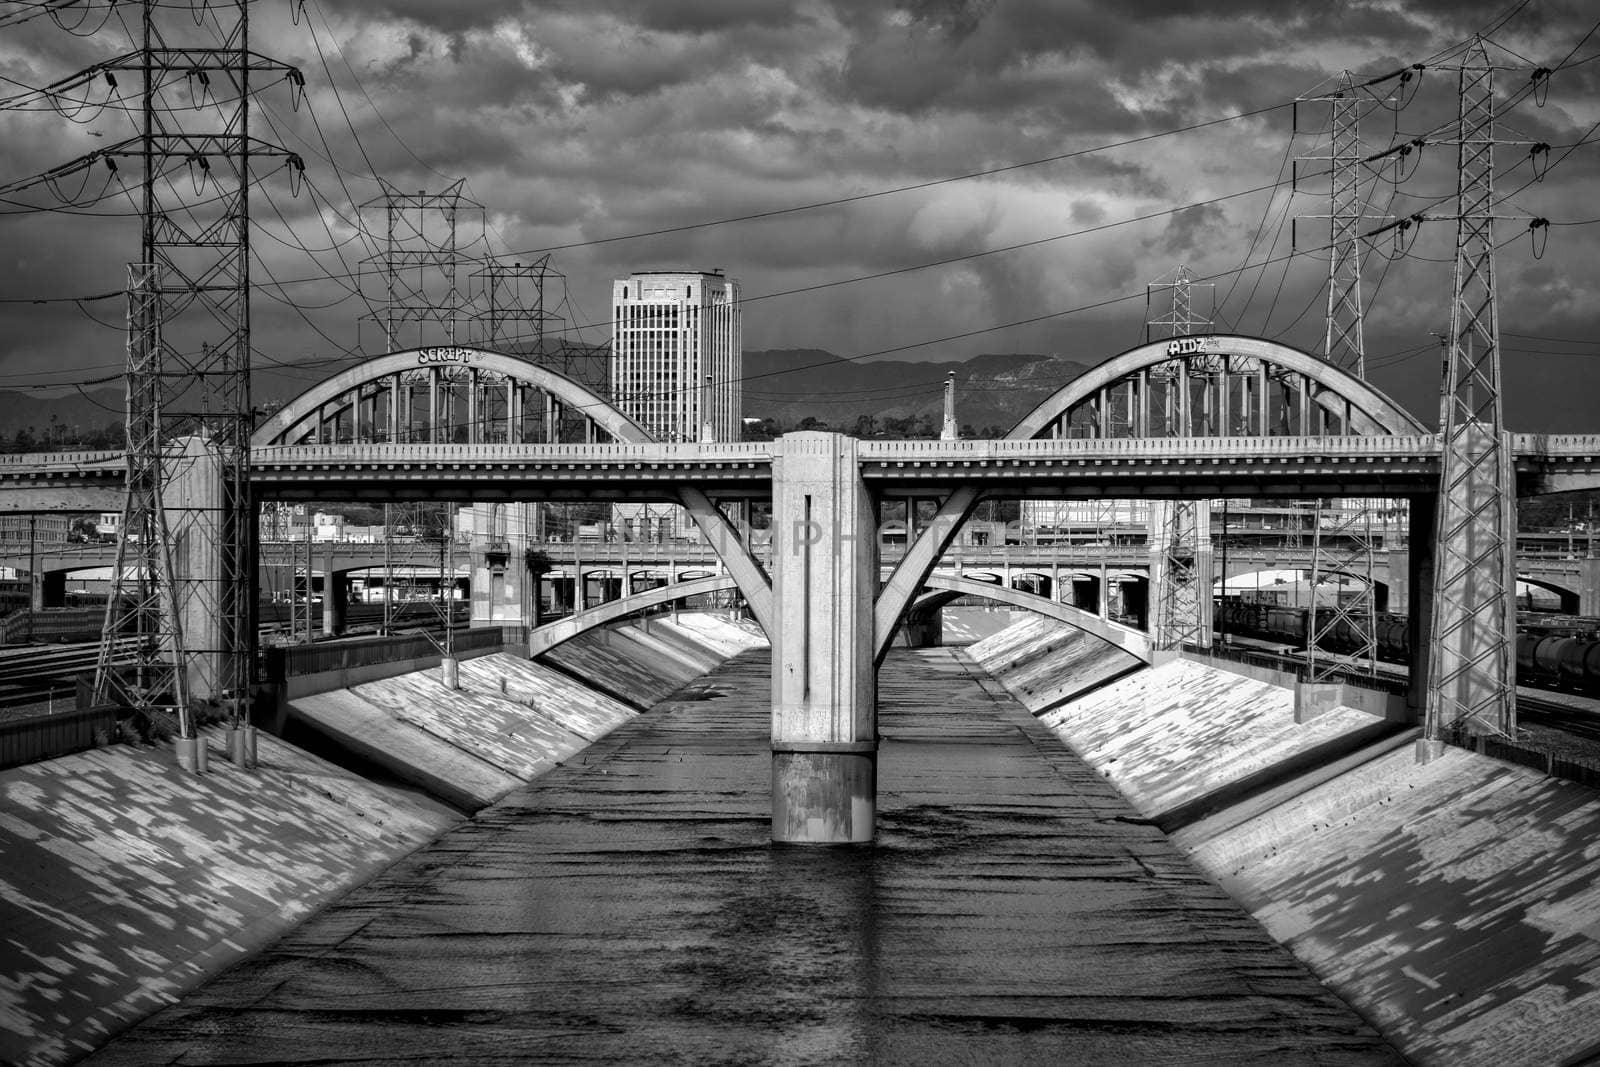 Sixth Street Viaduct and Los Angeles River in Black and White by wolterk